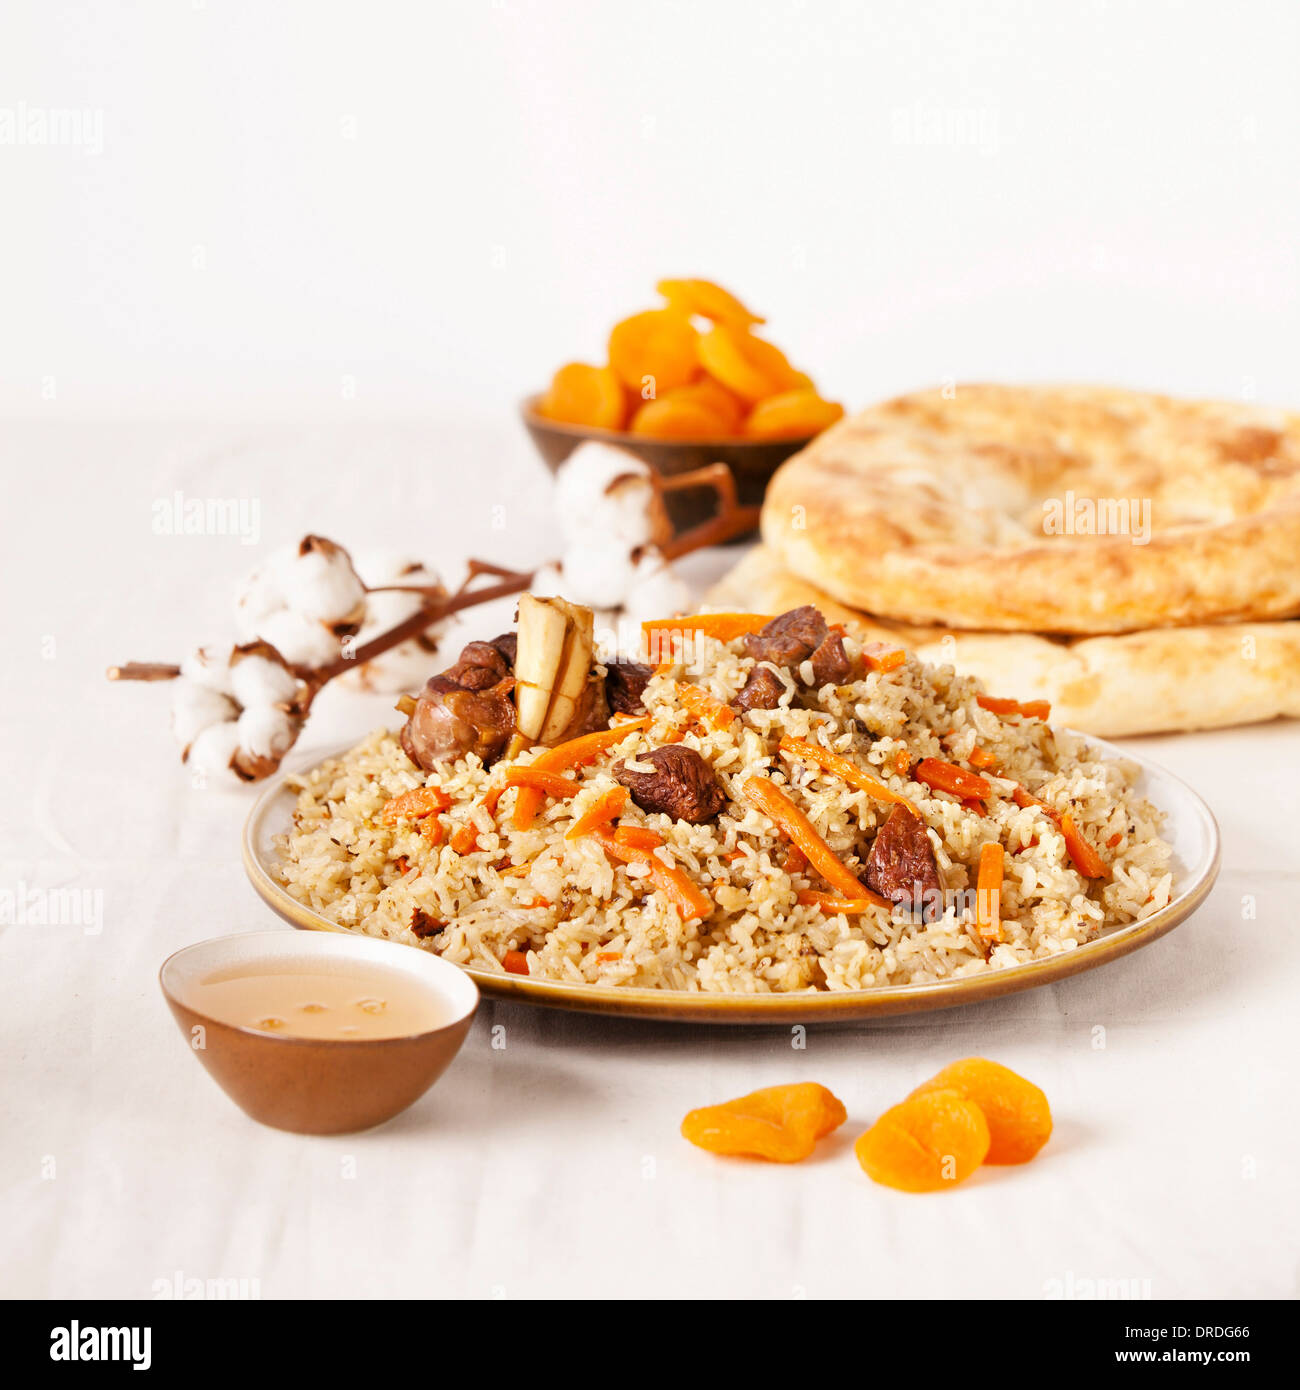 Uzbek national dish pilaf on plate with Uzbek bread and dried apricots Stock Photo